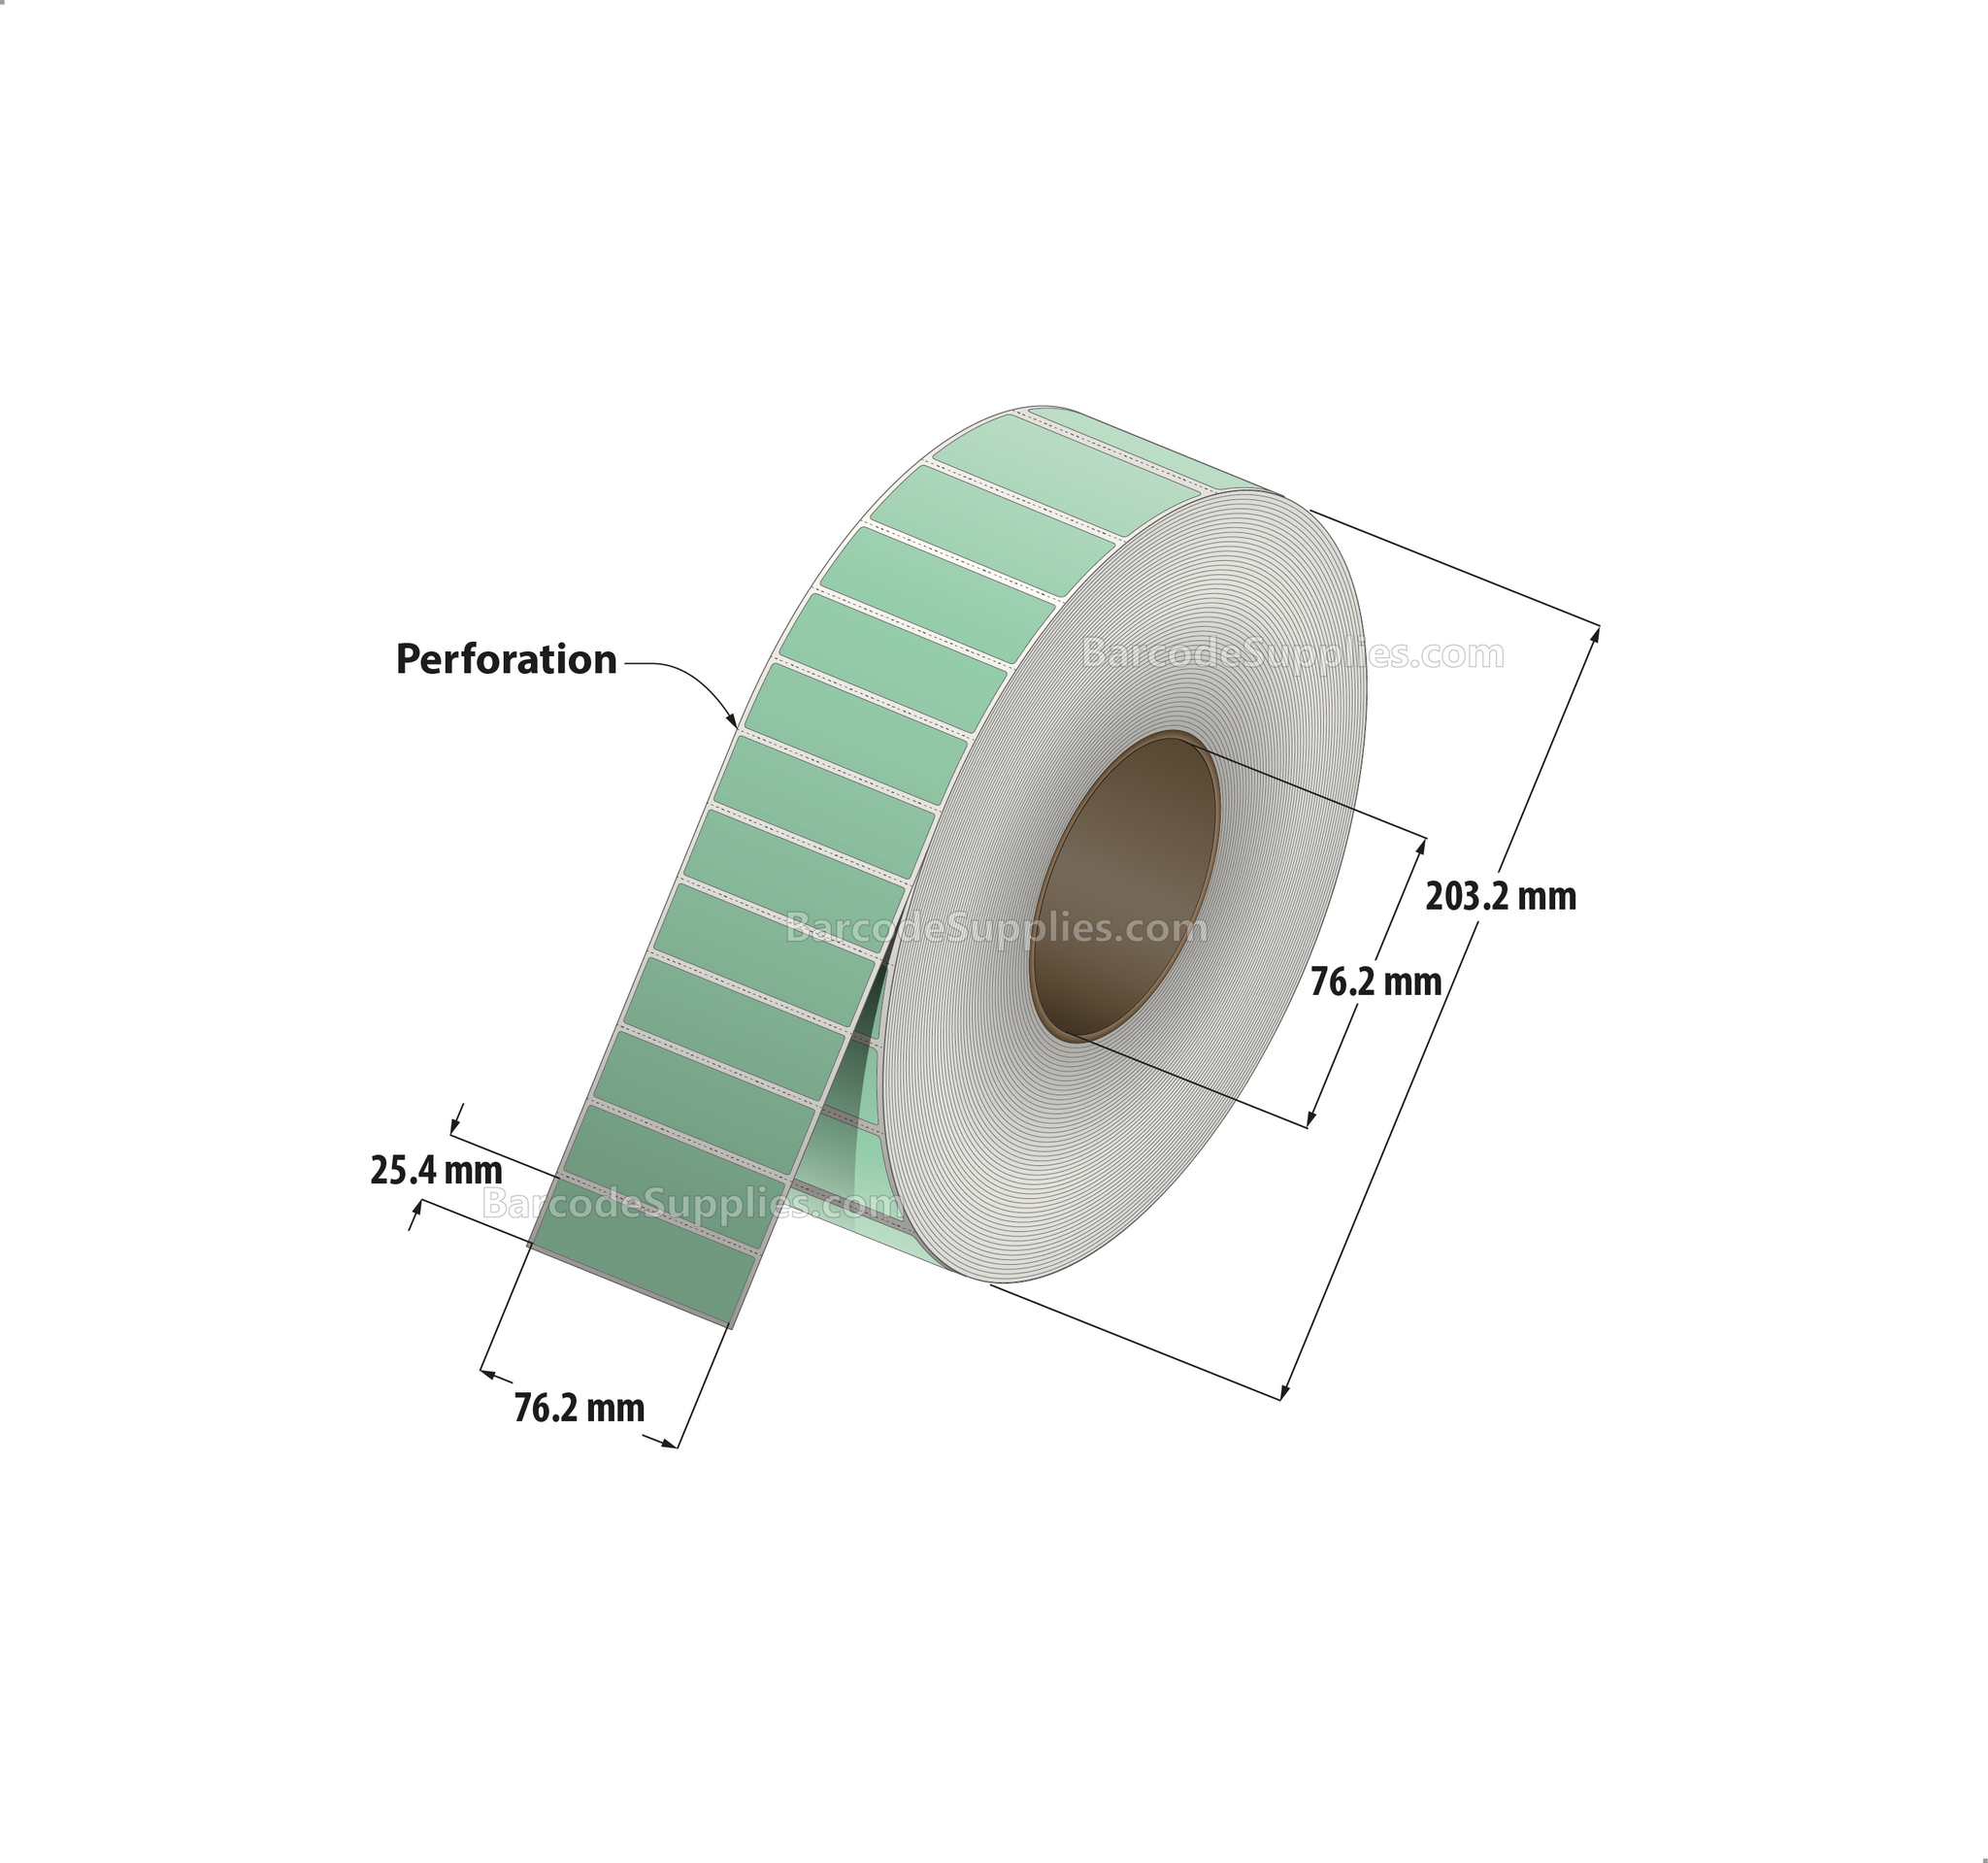 3 x 1 Thermal Transfer 345 Green Labels With Permanent Adhesive - Perforated - 5500 Labels Per Roll - Carton Of 8 Rolls - 44000 Labels Total - MPN: RFC-3-1-5500-GR